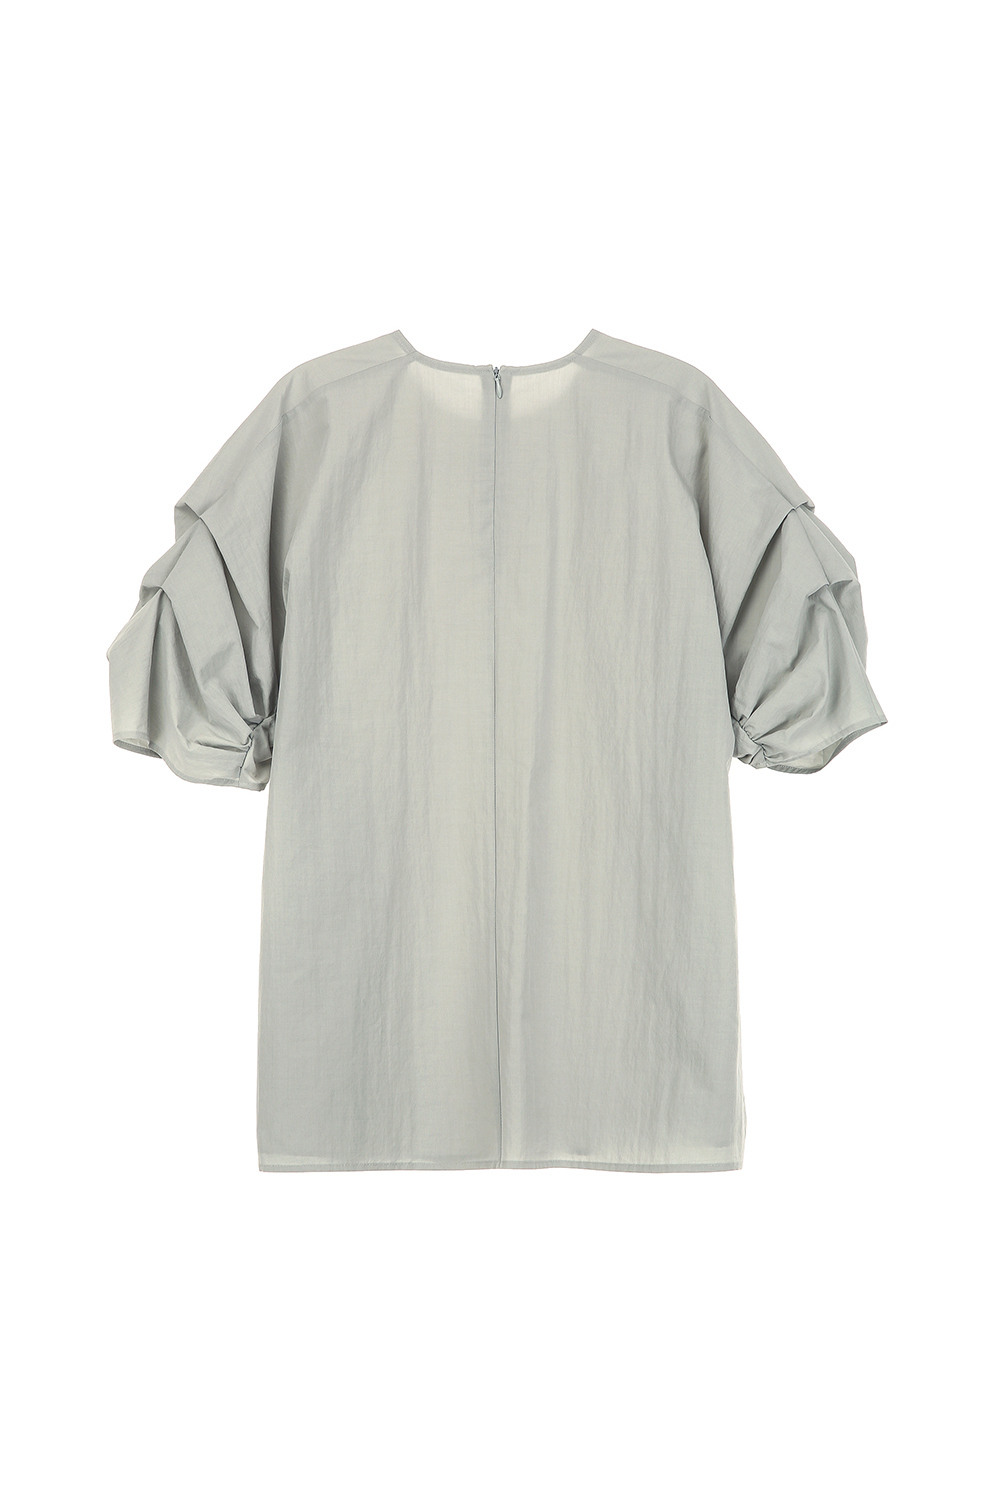 short sleeved tee grey color image-S1L8